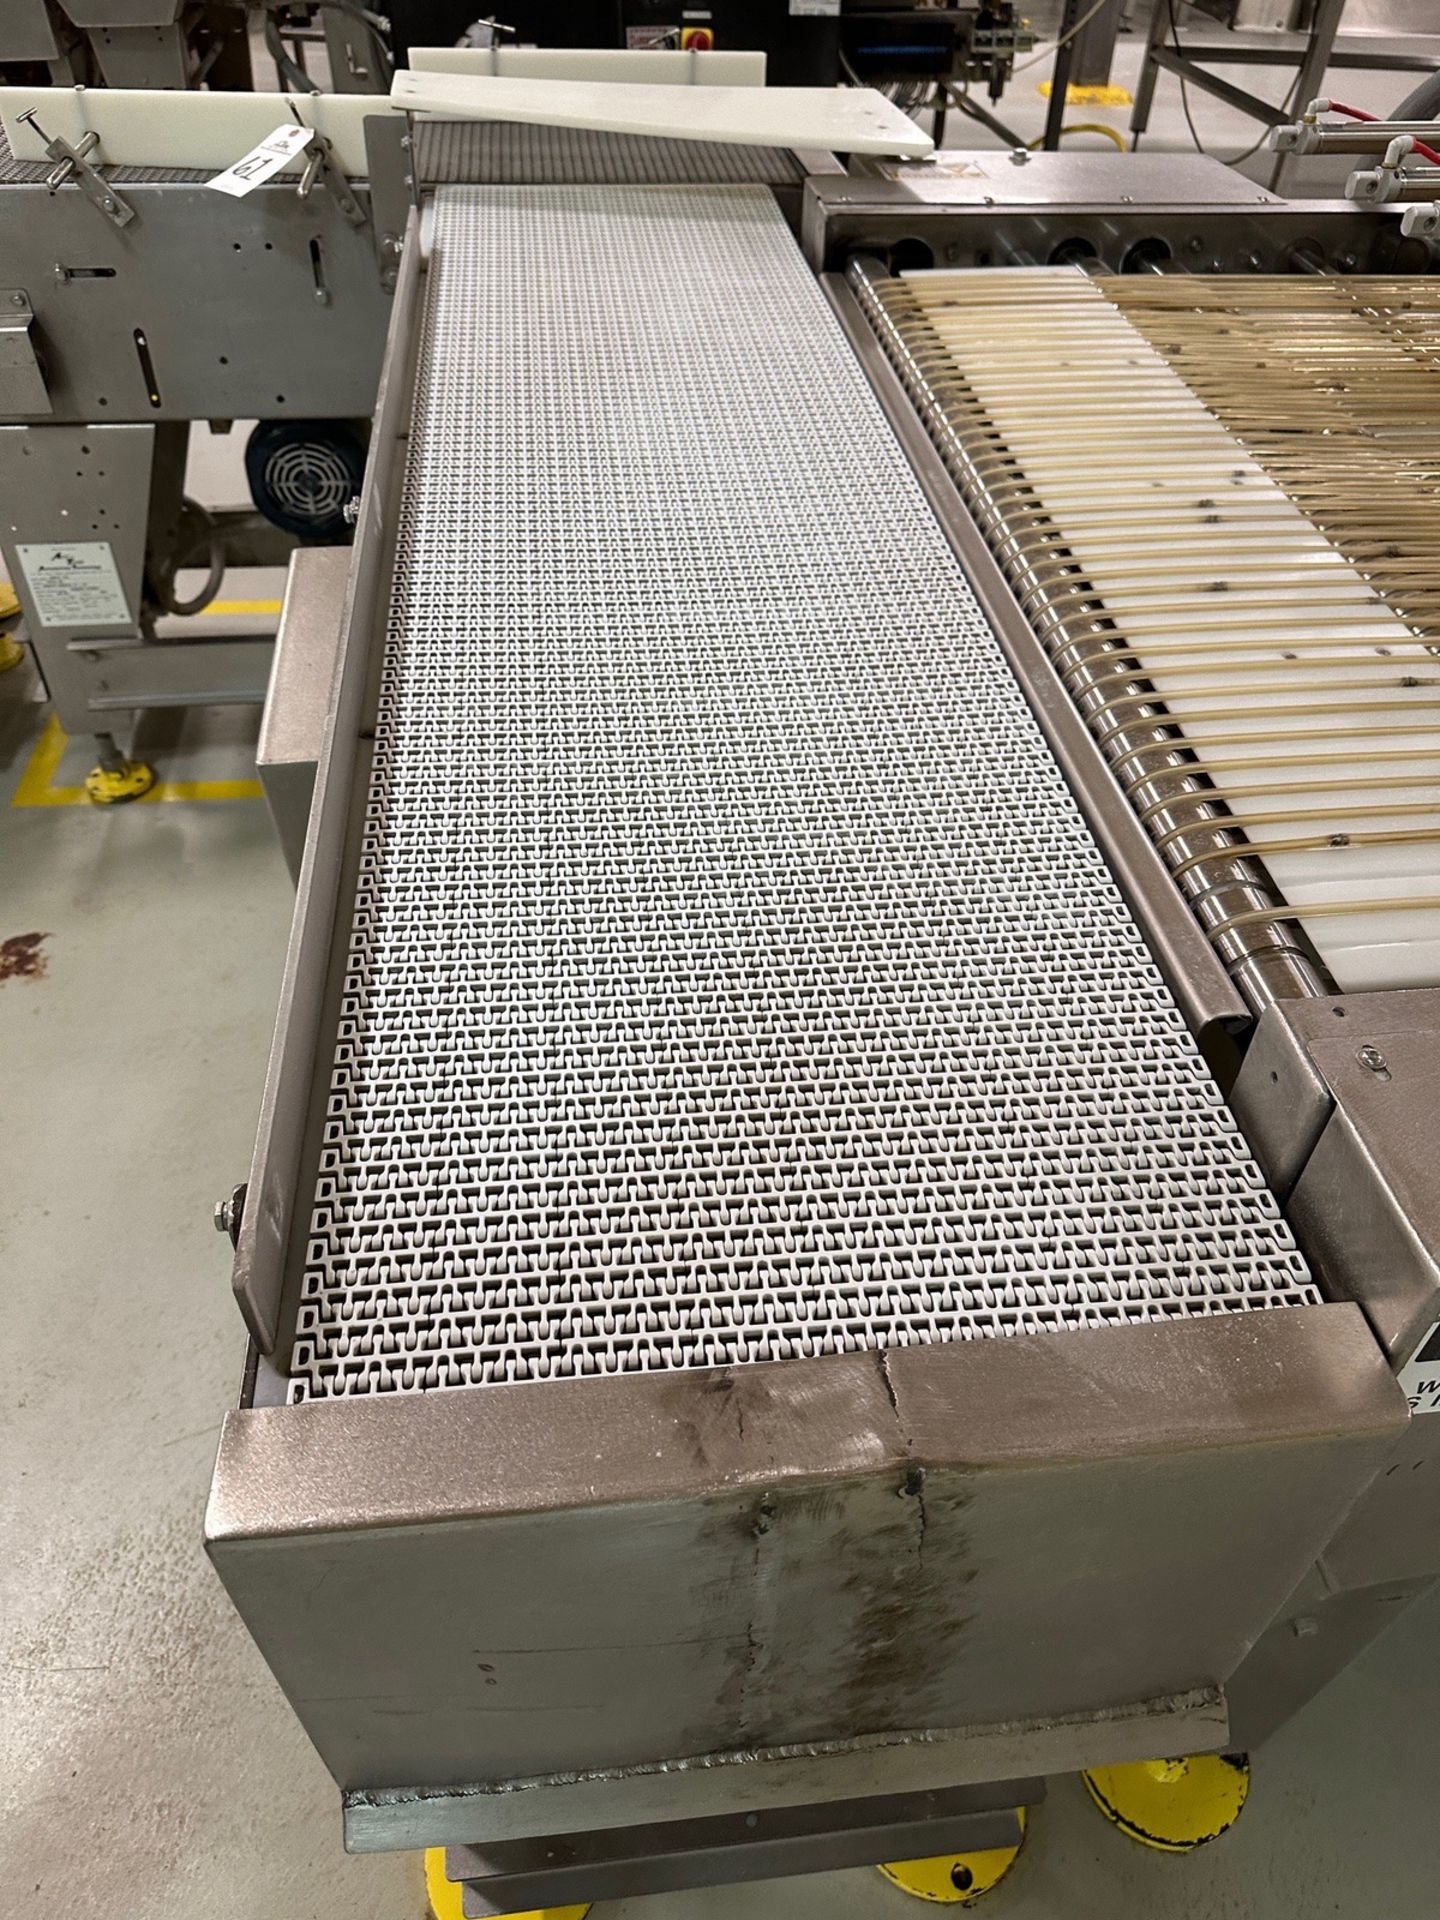 Lot of (2) Arr-Tech Intralox Belt over Stainless Steel Conveyors (Approx. 16" x 4' and 16" x 66") - Image 2 of 5